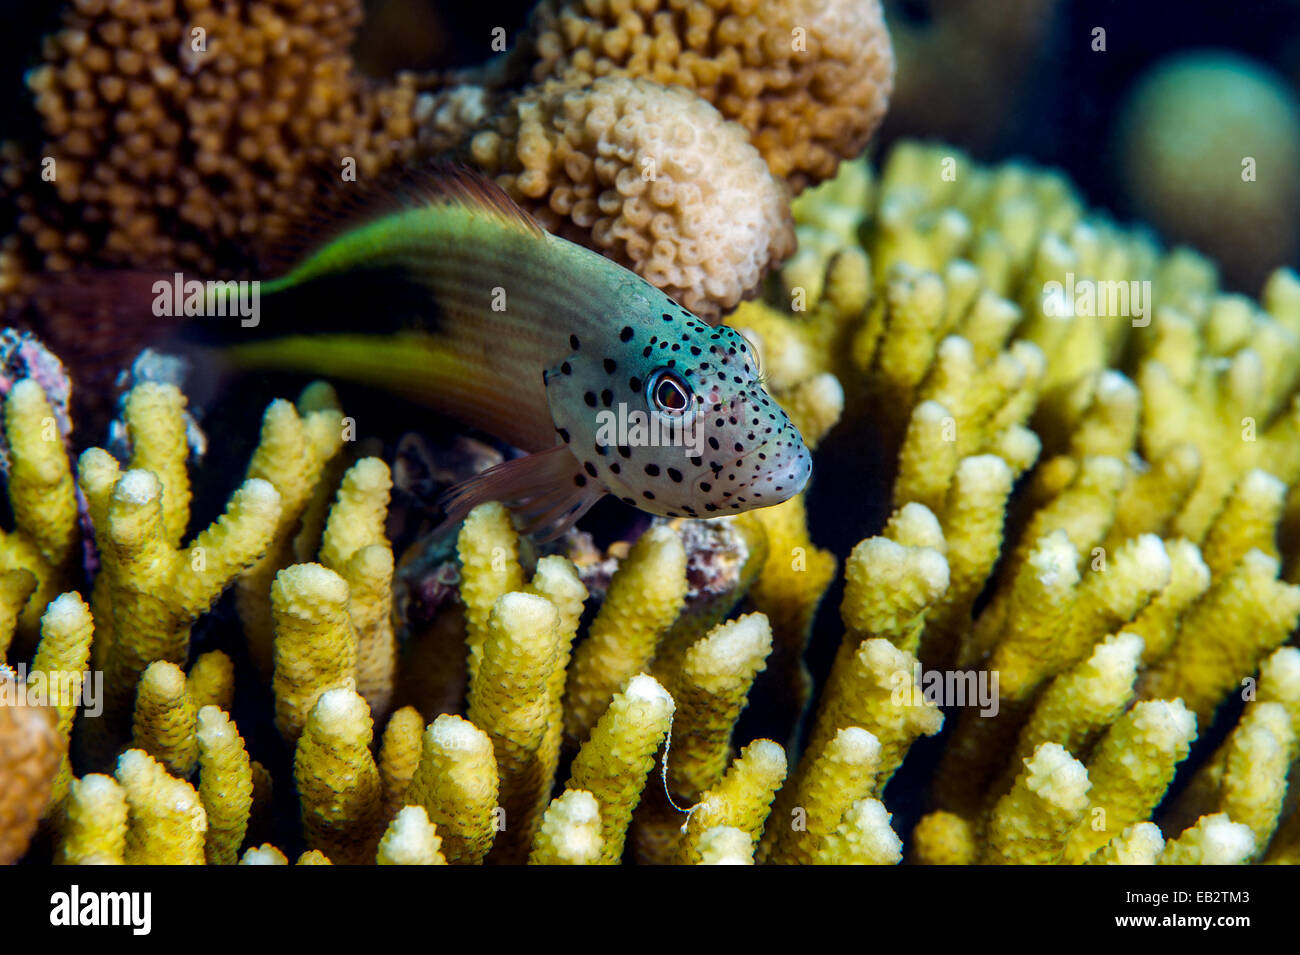 A Blackside hawkfish with a spotted face patrols it's territory on a tropical reef from a perch on a hard coral. Stock Photo